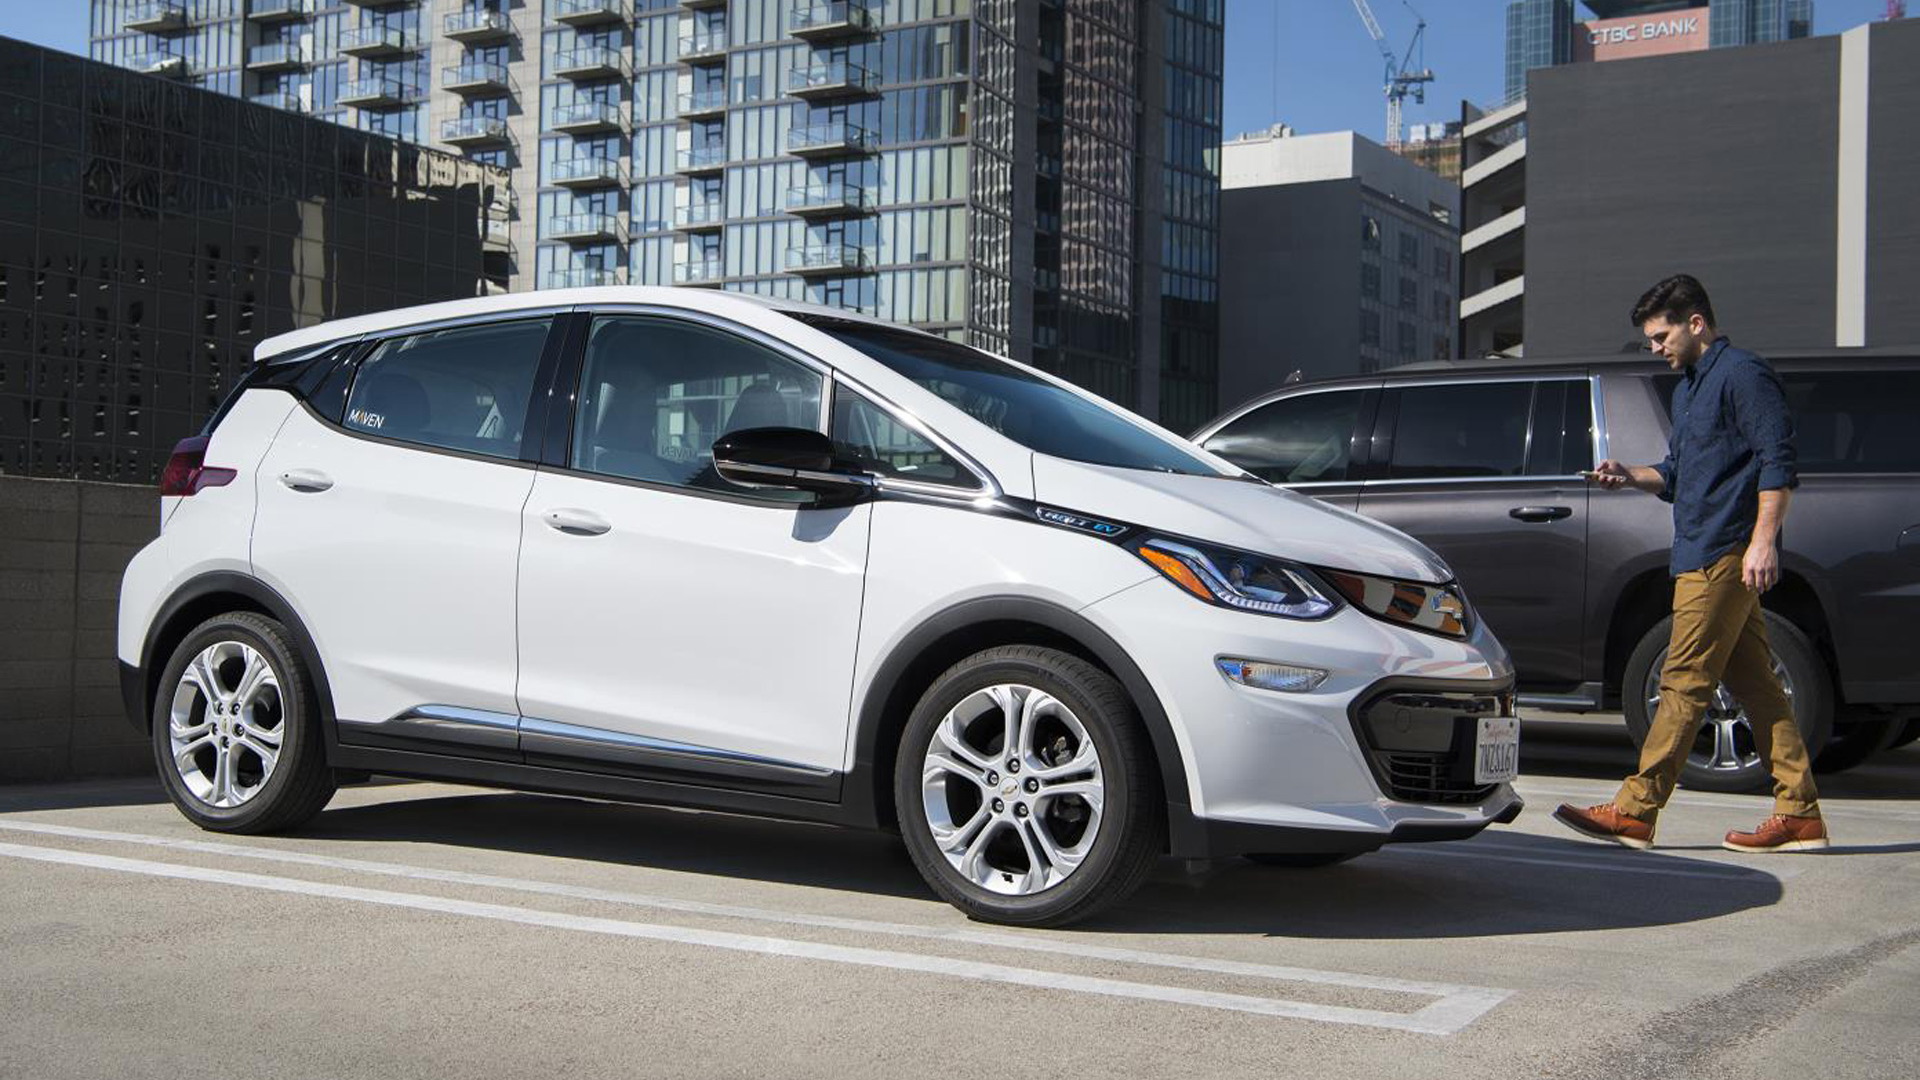 2017 Chevrolet Bolt EV added to Maven car- and ride-sharing fleet in Los Angeles, California